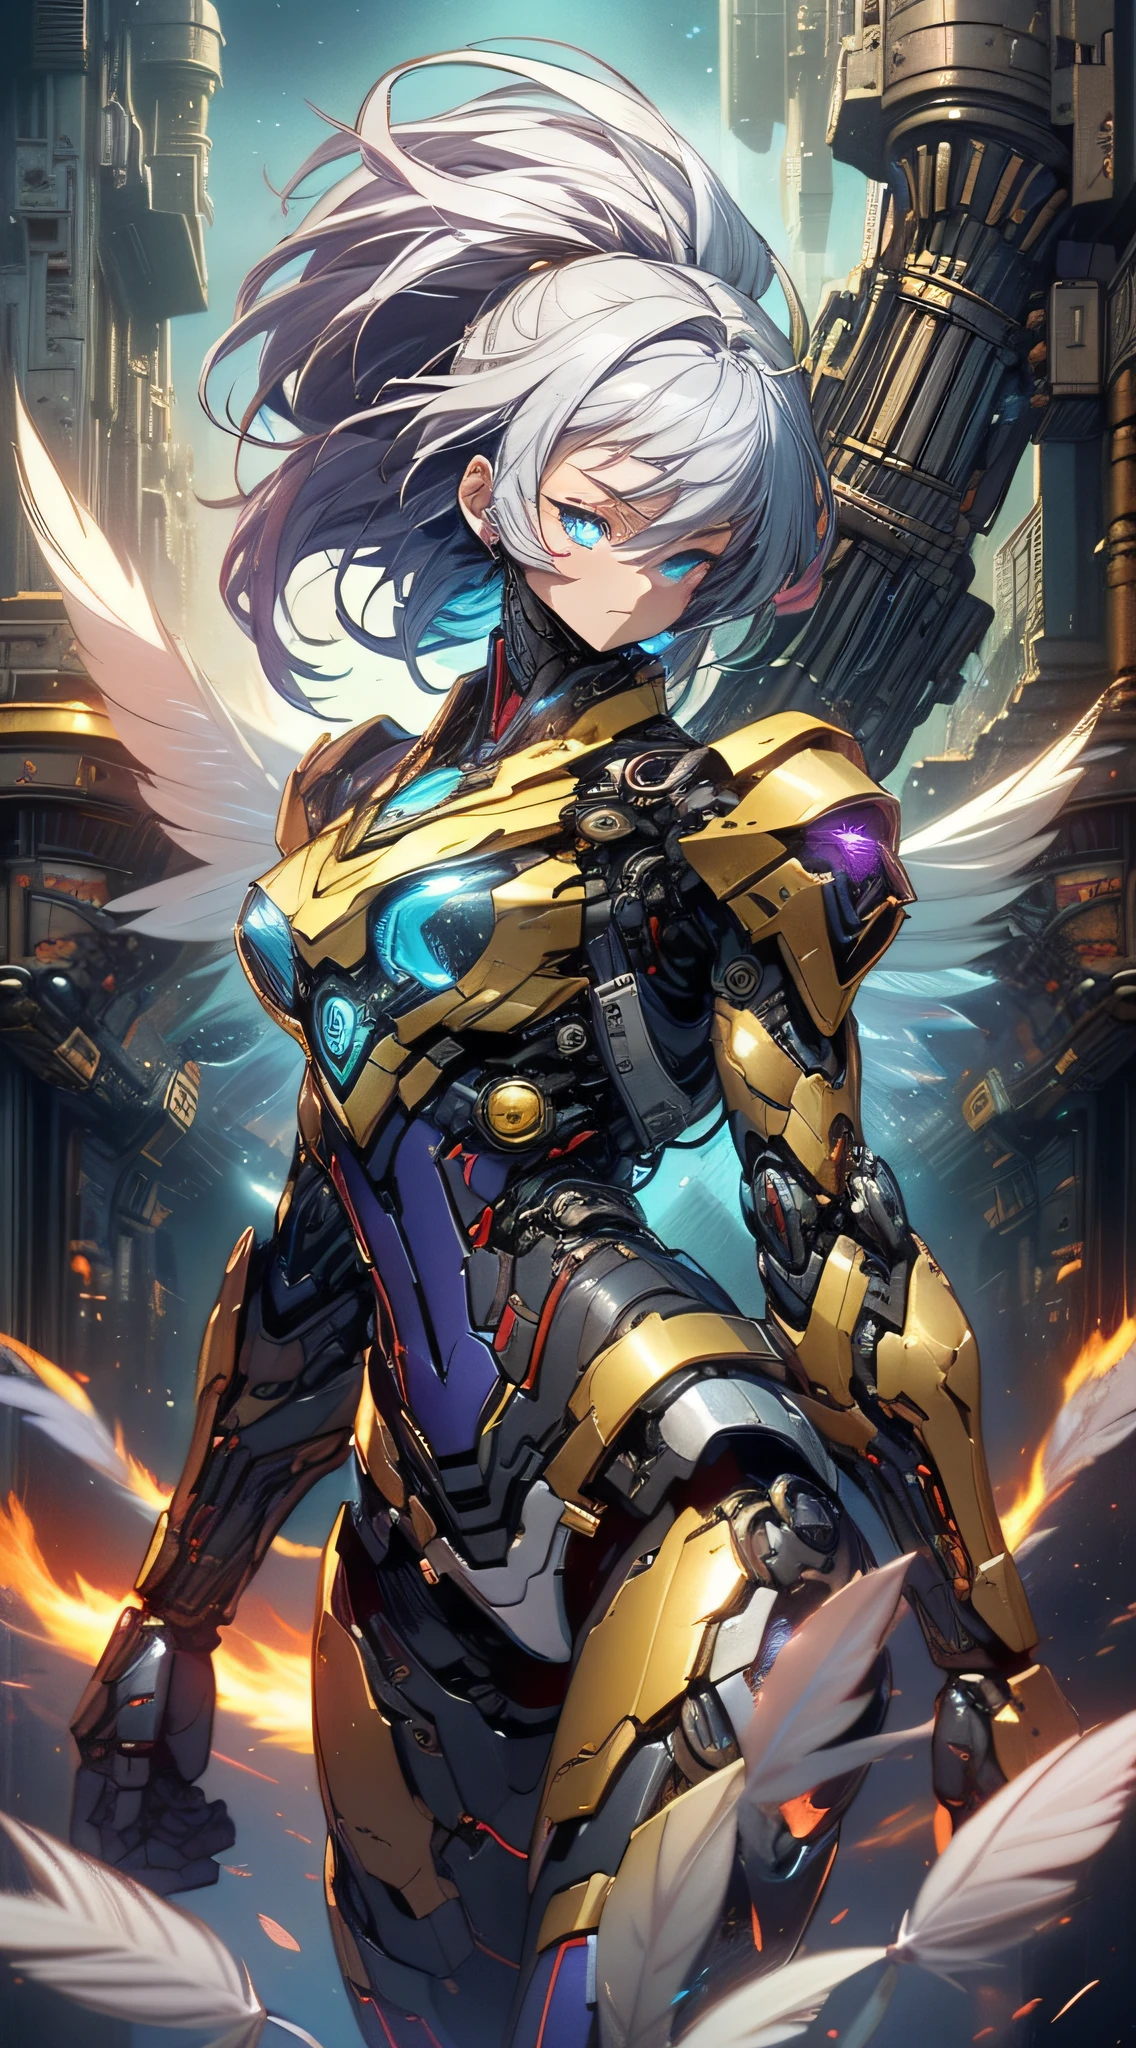 top-quality、Top image quality、​masterpiece、girl with((red and blue mechanical body armor、red mechanic arm、purple leg arms、Shining gold body line、sixteen years old、teen ager、cute little、Best Bust、big bast,Beautiful light blue eyes、Breasts wide open, Purple hair、silver flight unit,Semi-long、A slender,Large valleys、belligerent movements,glowing whip、)),hiquality、Beautiful Art、Background with((Midnight City、Pillar of fire、fluttering white feathers)))、Depth((Black Giant Robot)),masutepiece、depth of fields,Cinematic style